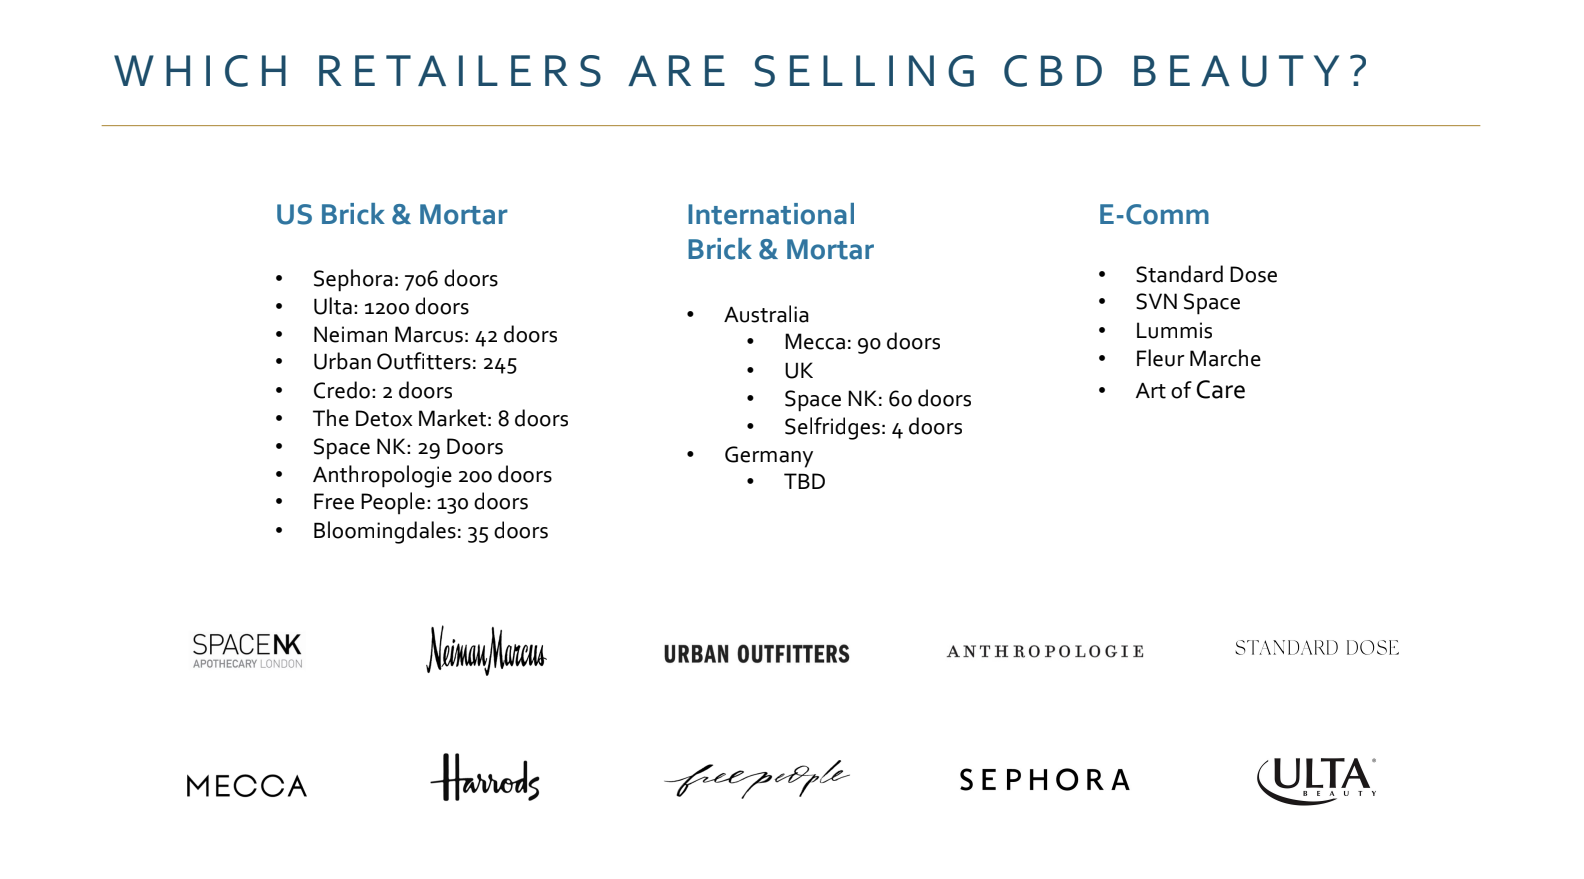 An image showing the after image from Ambari's new investor deck that Venga created showing which retailers are selling CBD beauty